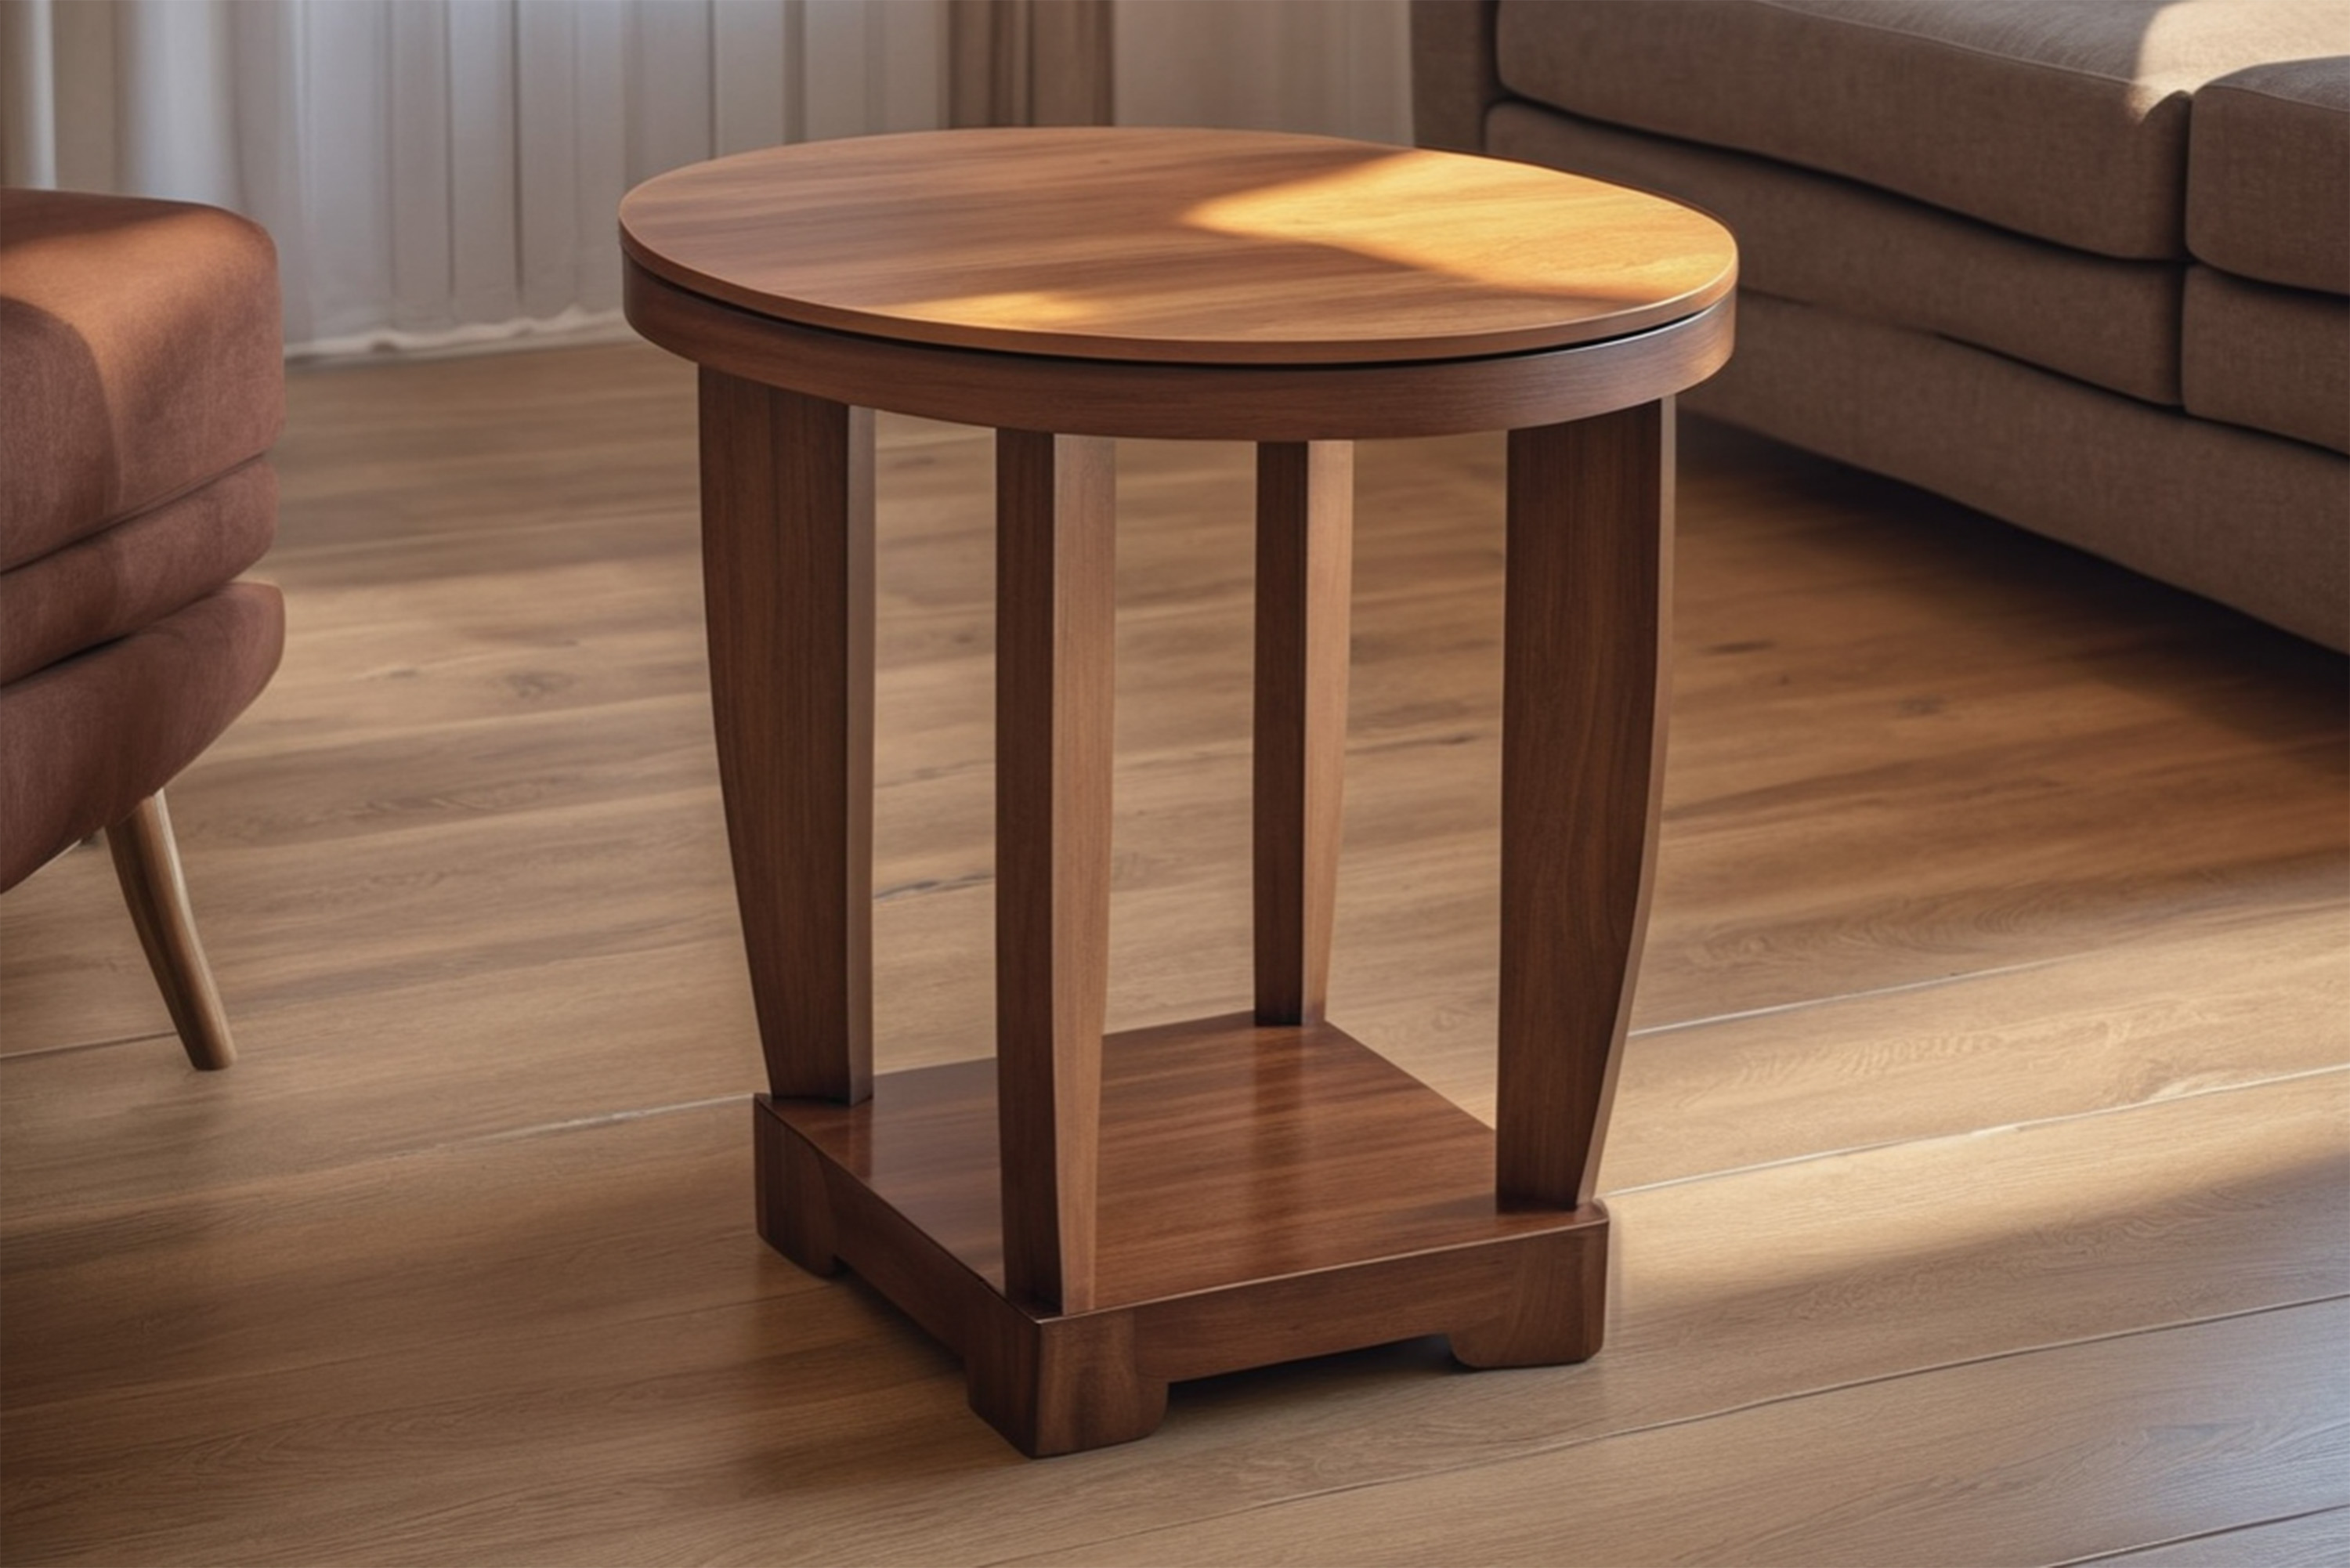 Art Deco side table with walnut